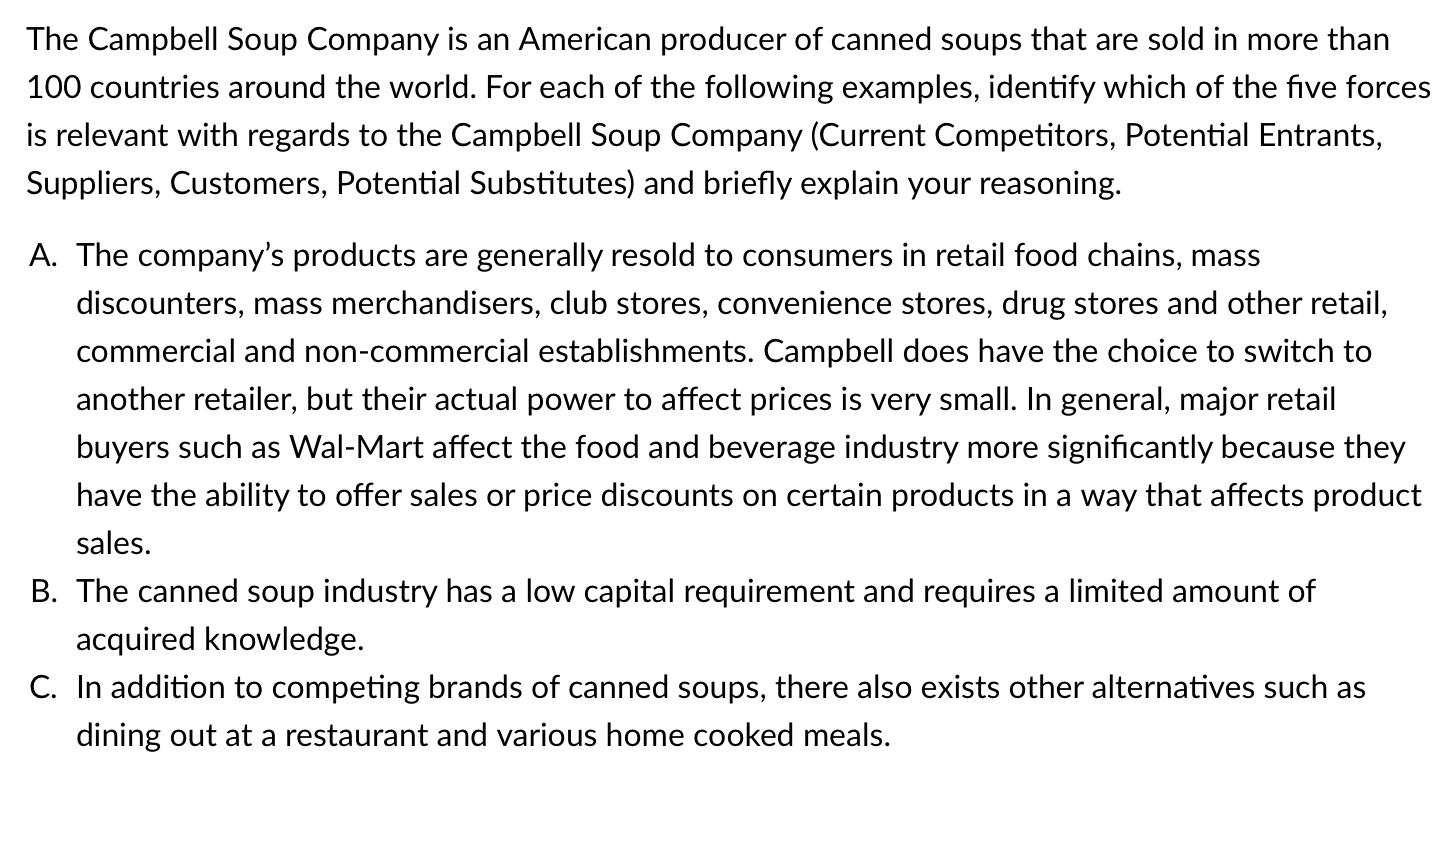 The Campbell Soup Company is an American producer of canned soups that are sold in more than 100 countries around the world.